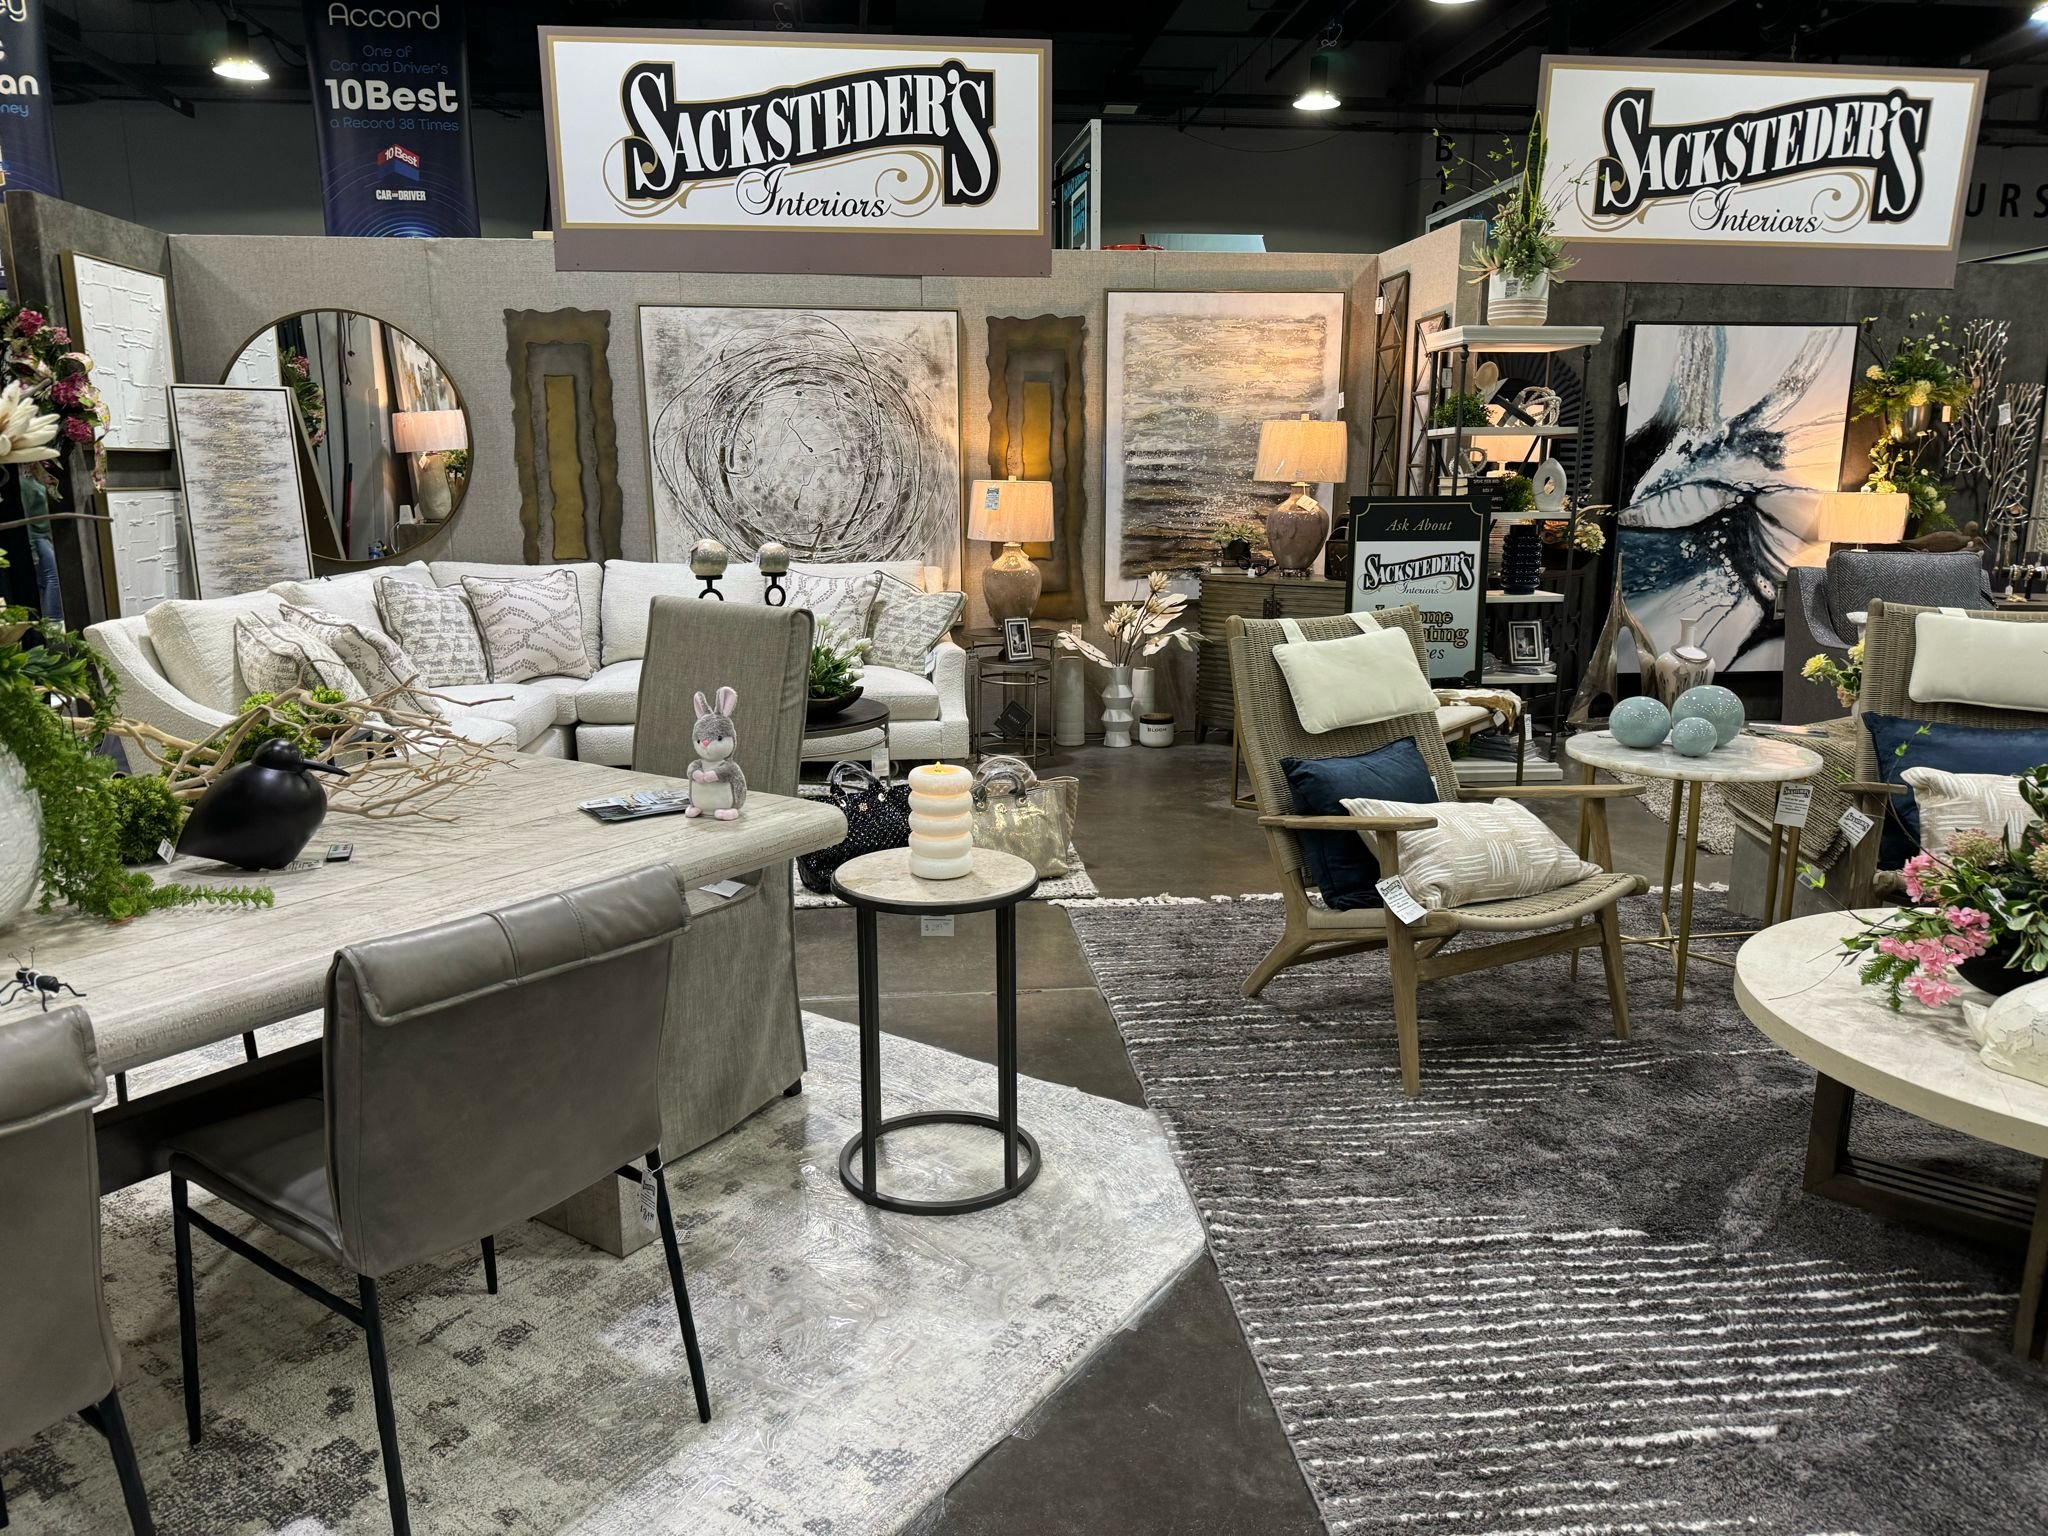  Need advice? Ask a Designer presented by Sacksteder's Interiors can help you sort out the latest trends and answer all your home décor questions. 